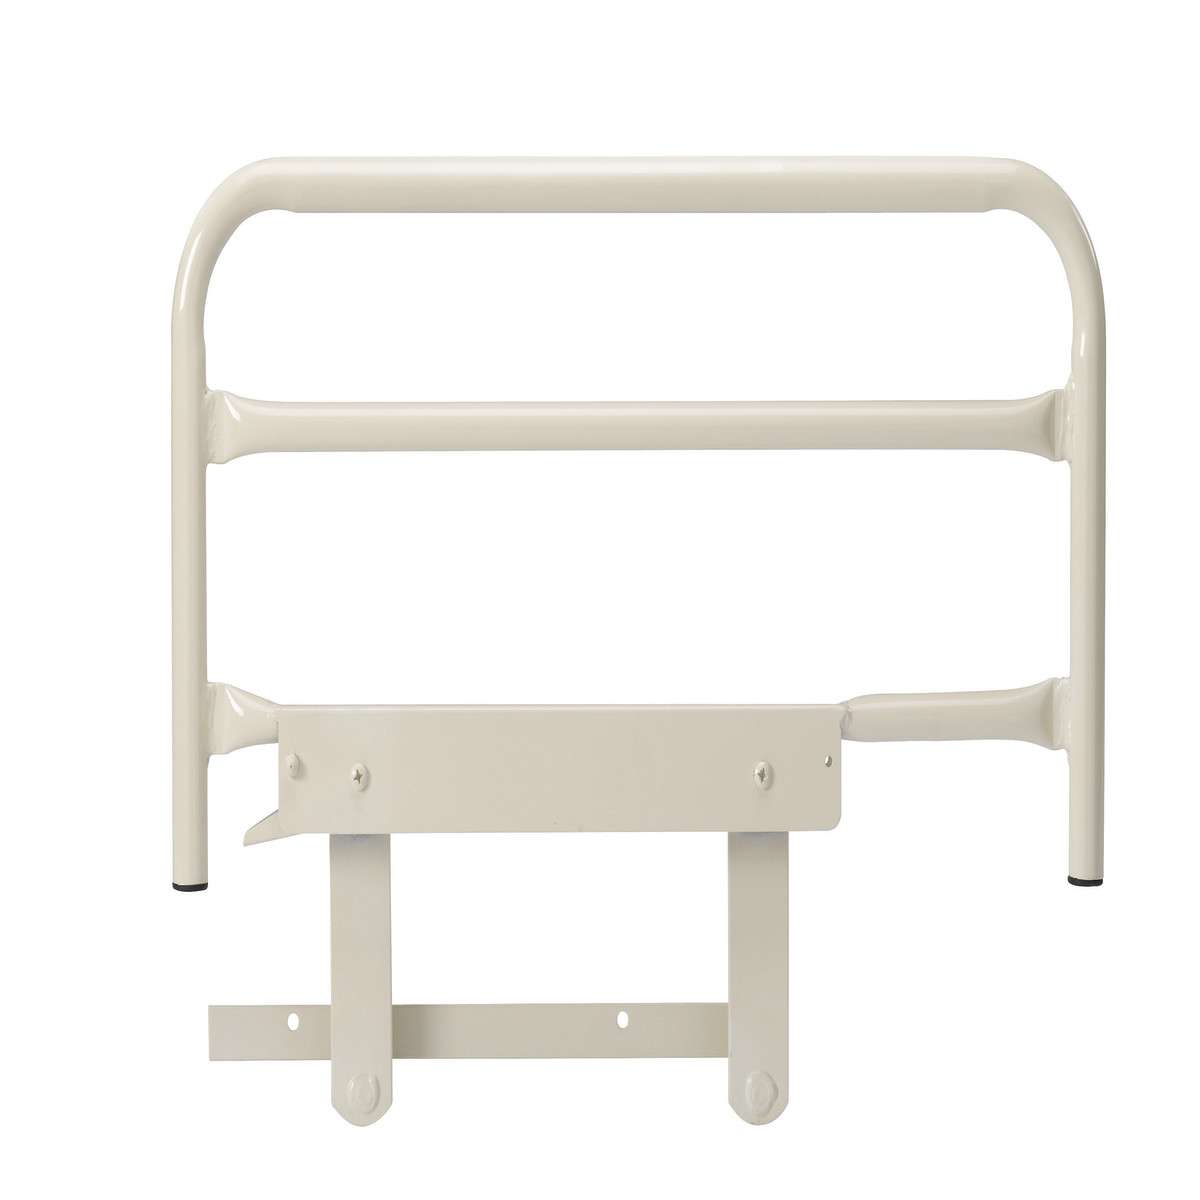 Invacare 1/4 Length Positioning Rail